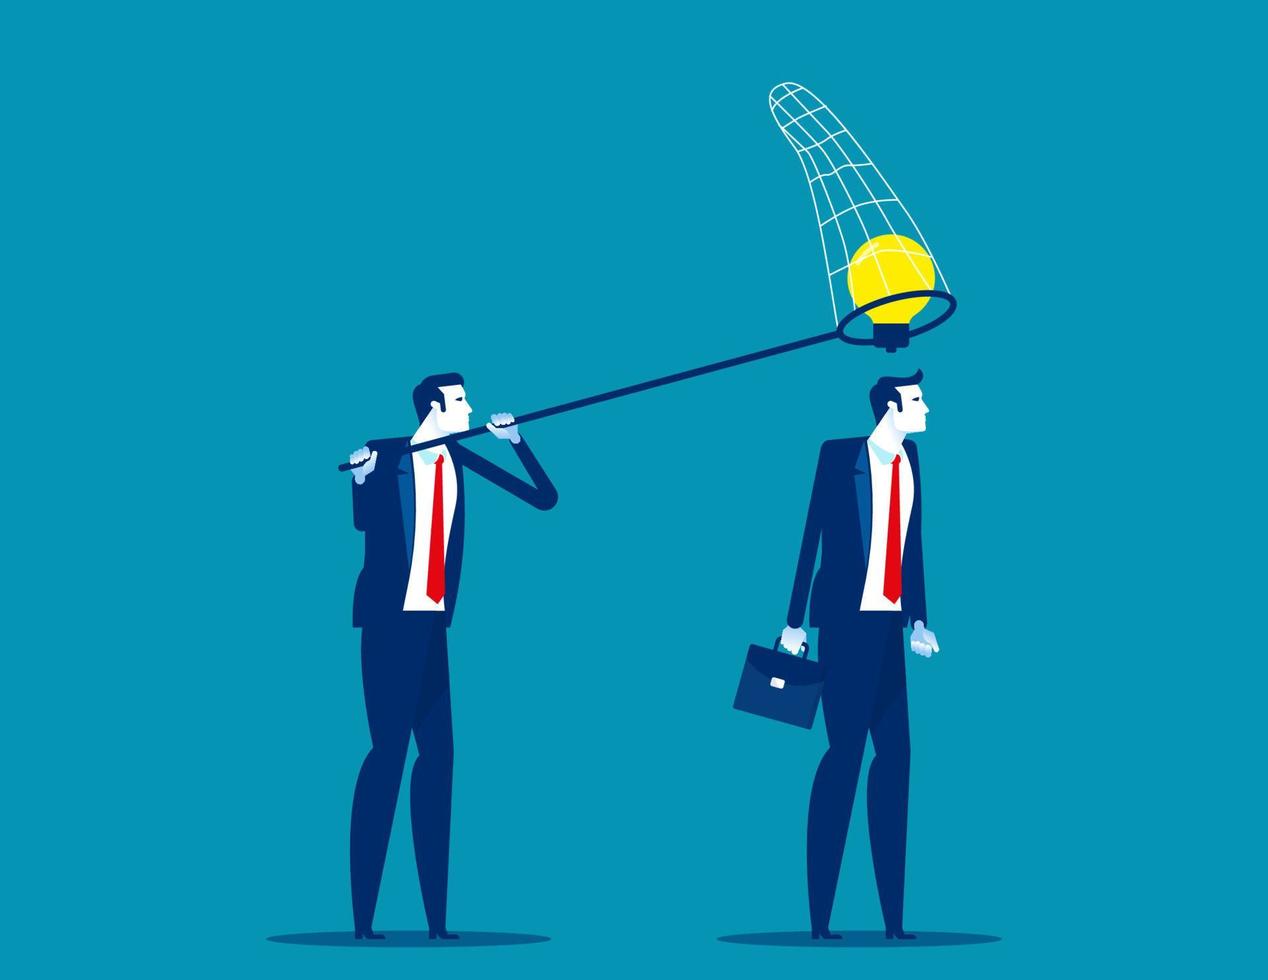 Thief business partner steals ideas for thinking colleague. Concept business plagiarism vector illustration